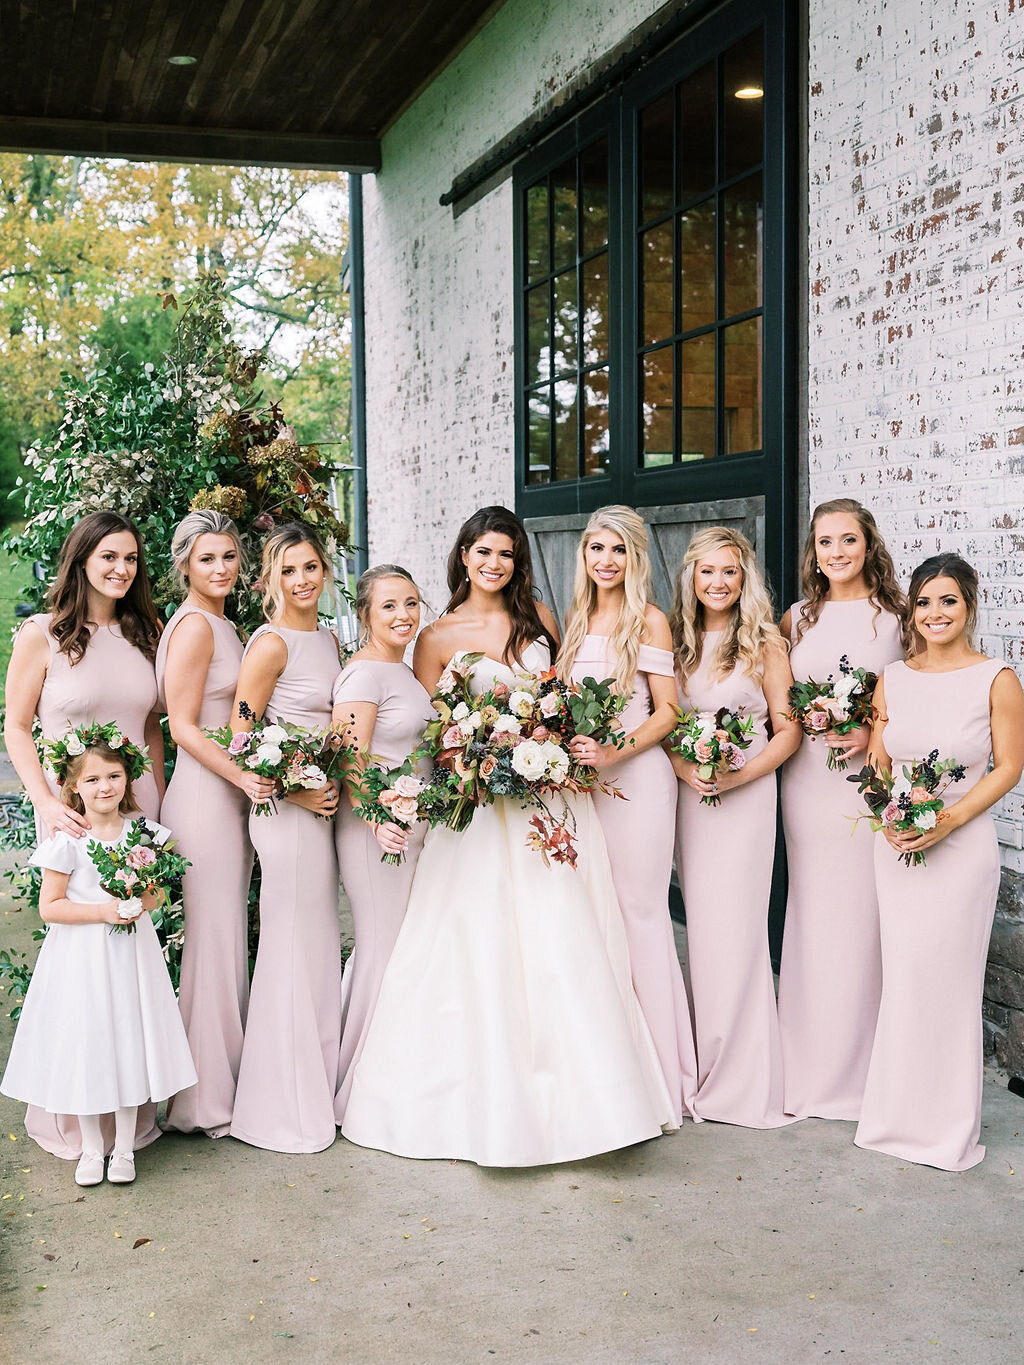 Blush bridesmaid dresses with fall floral bouquets of garden roses, ranunculus, berries, and fall leaves and greenery. Nashville wedding florist at Trinity View Farm.